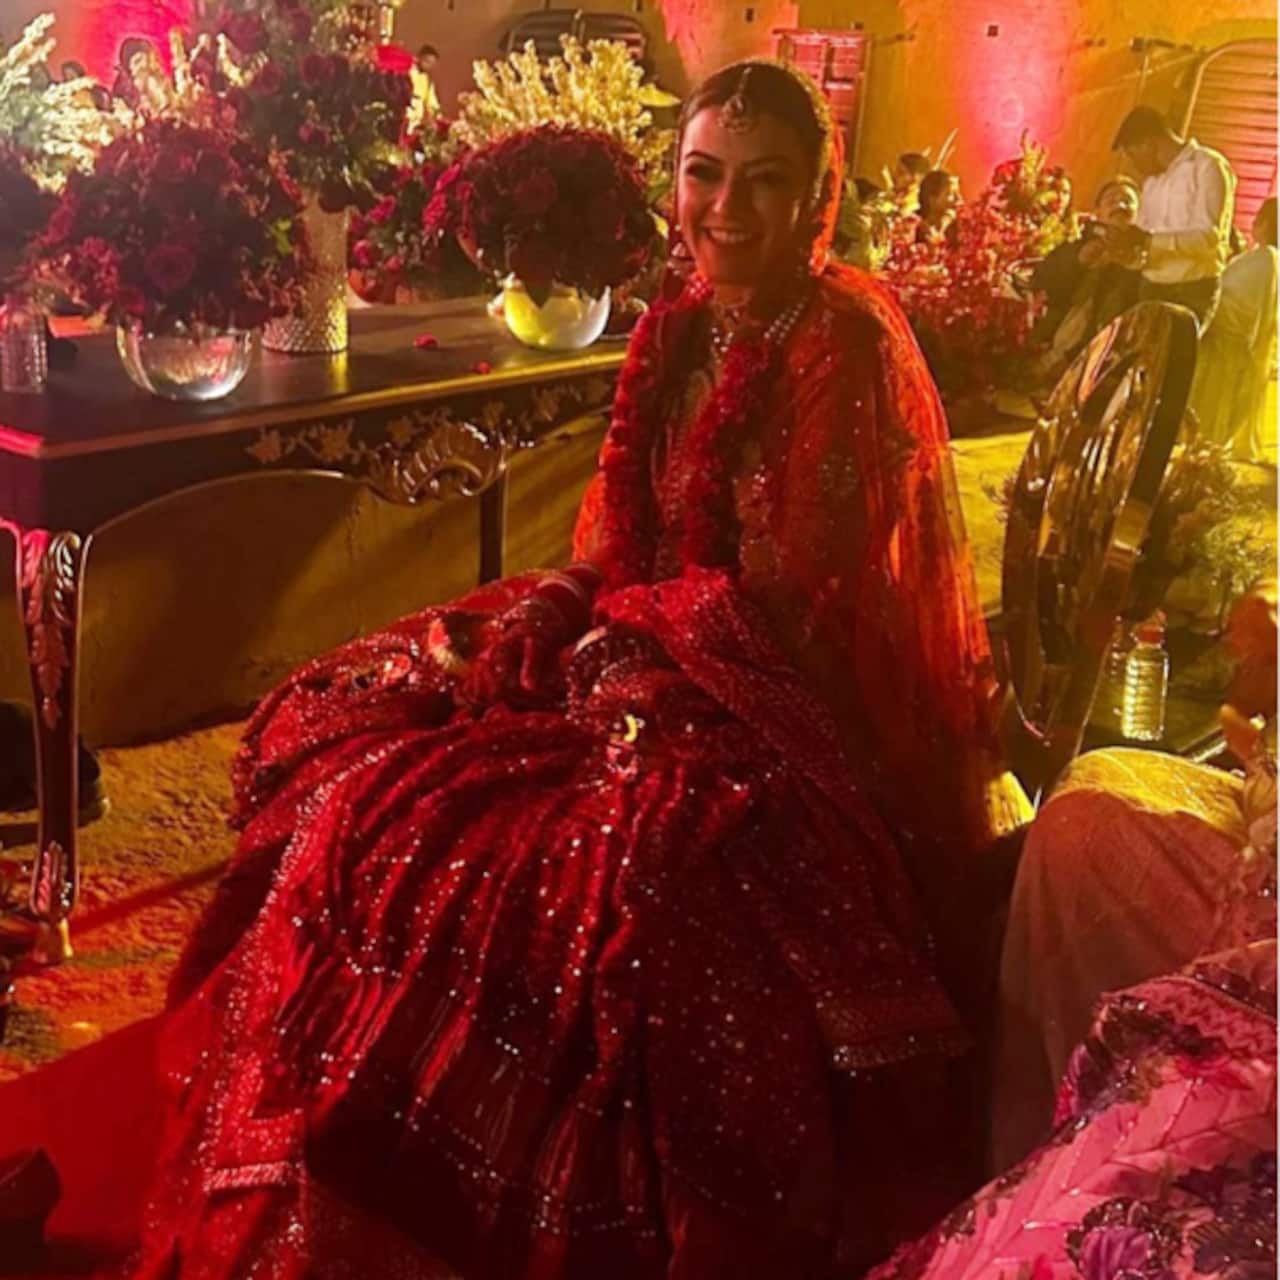 Some moments of chill for the bride, Hansika Motwani at her wedding 